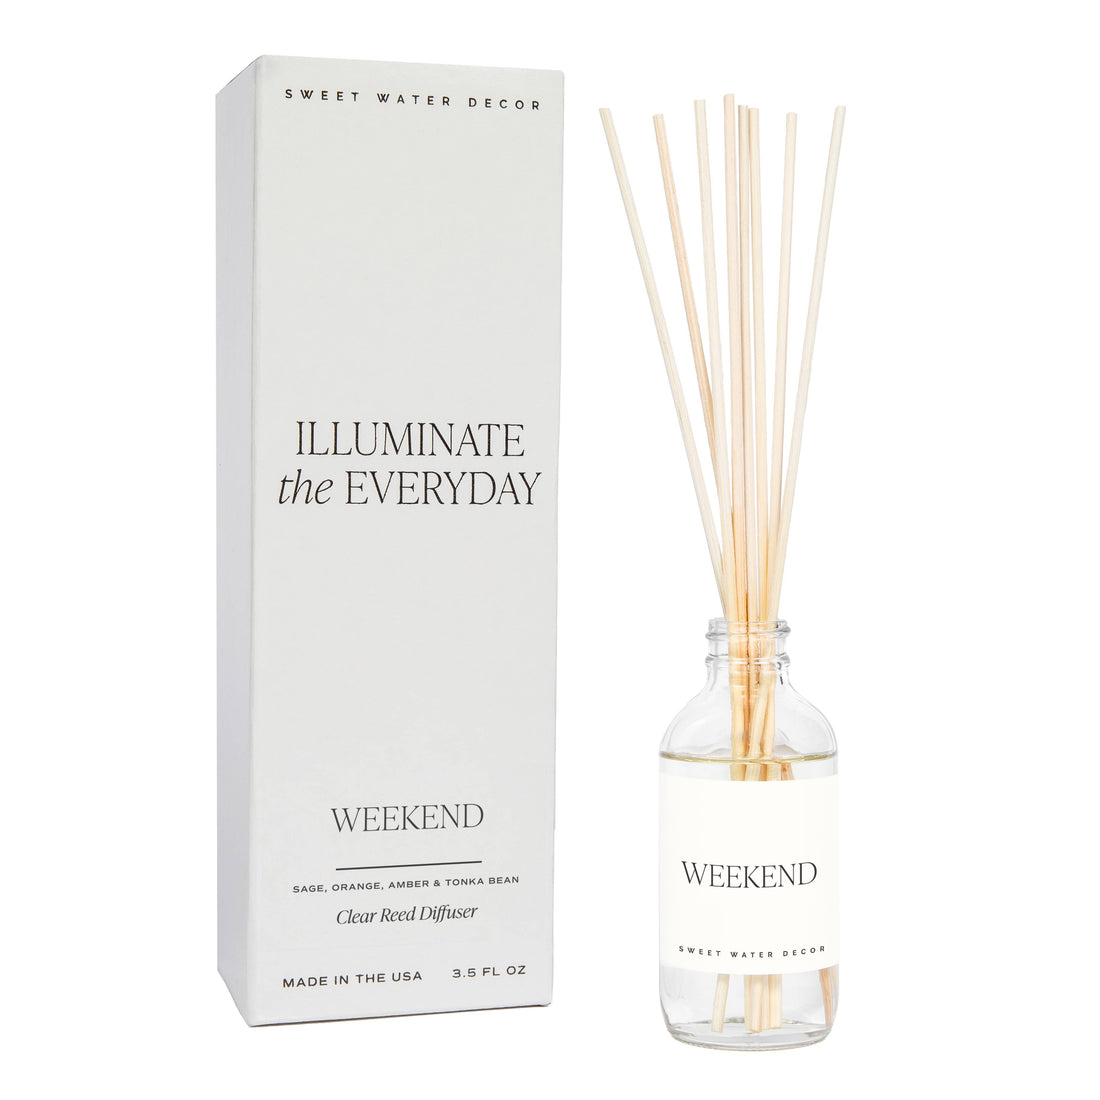 *NEW* Weekend Reed Diffuser - Gifts &amp; Home Decor